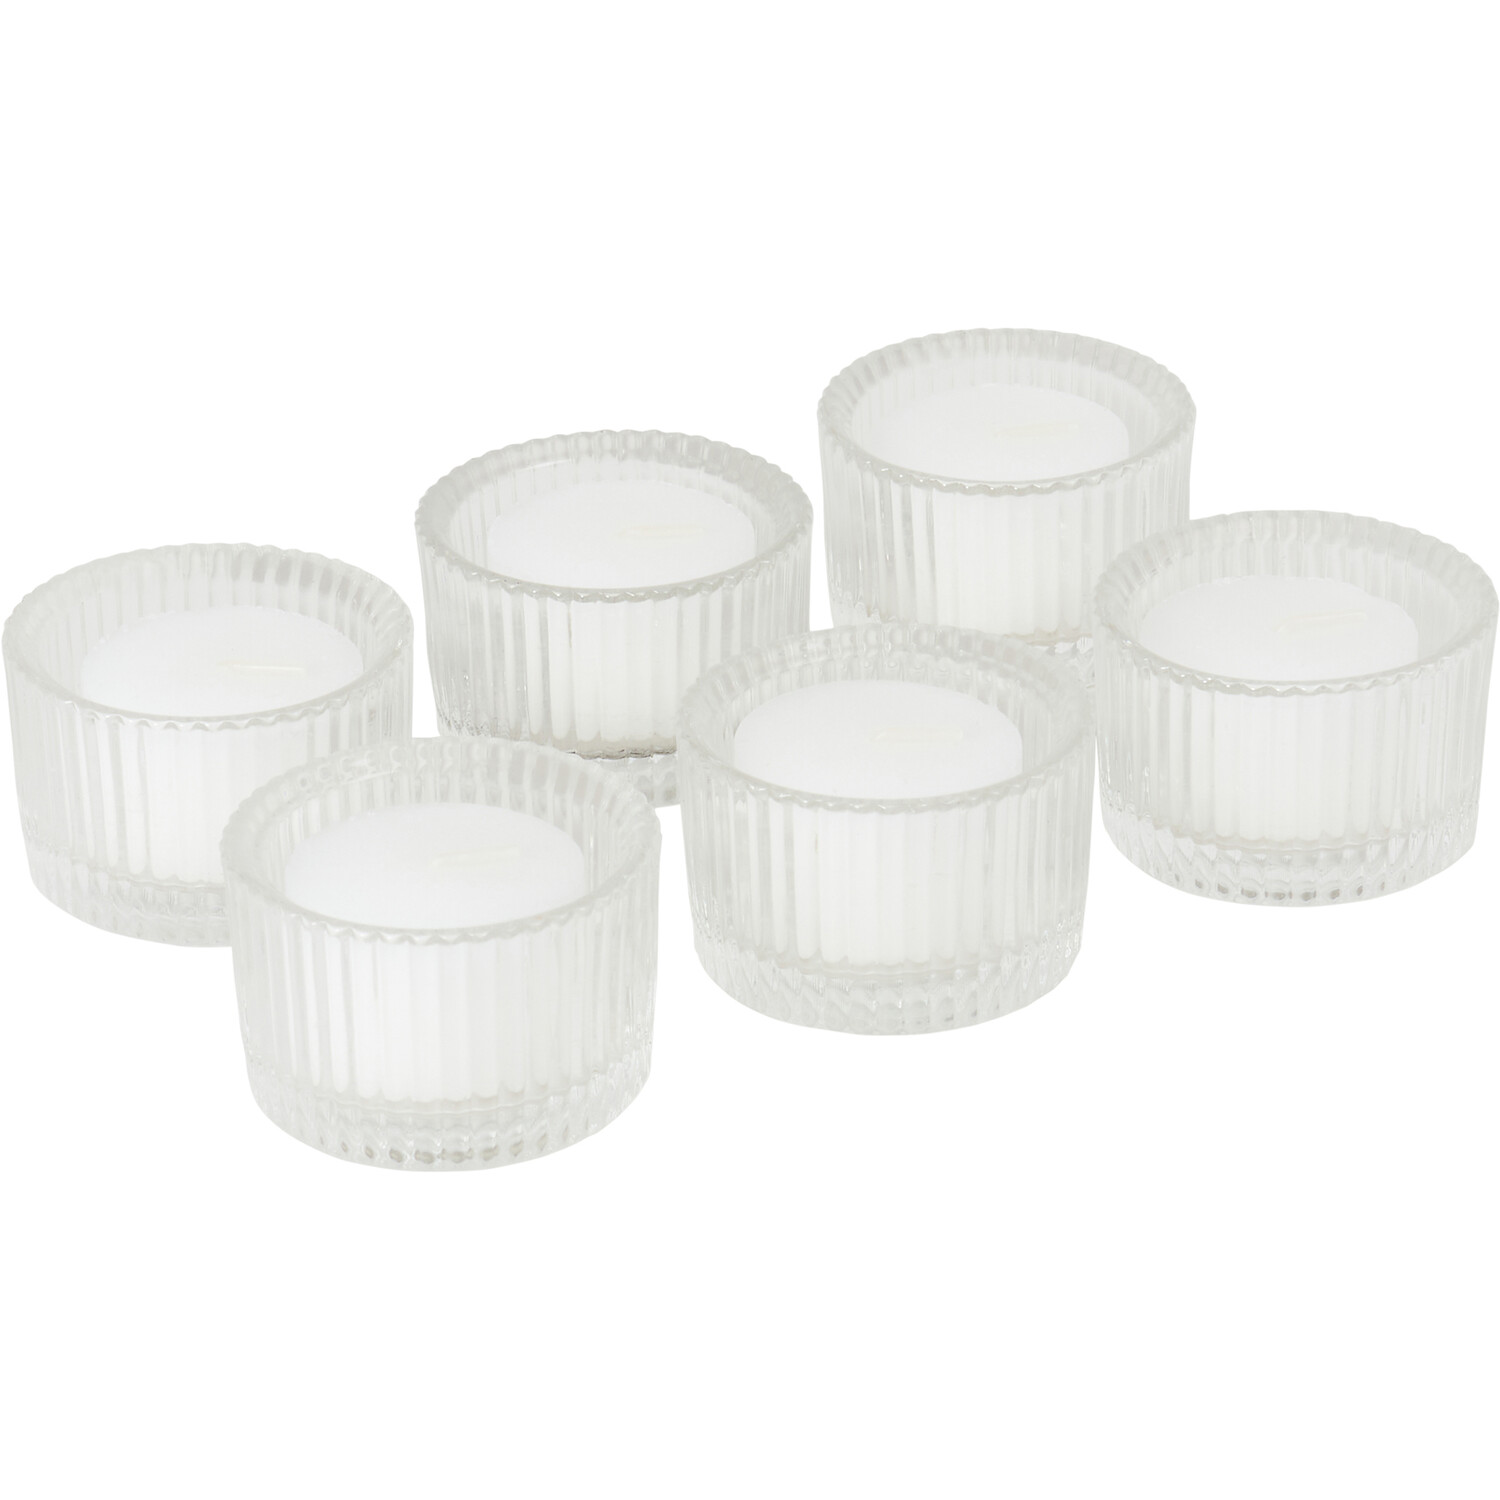 Pack of 6 Ribbed Tealight Holders and Tealights - Clear Image 2